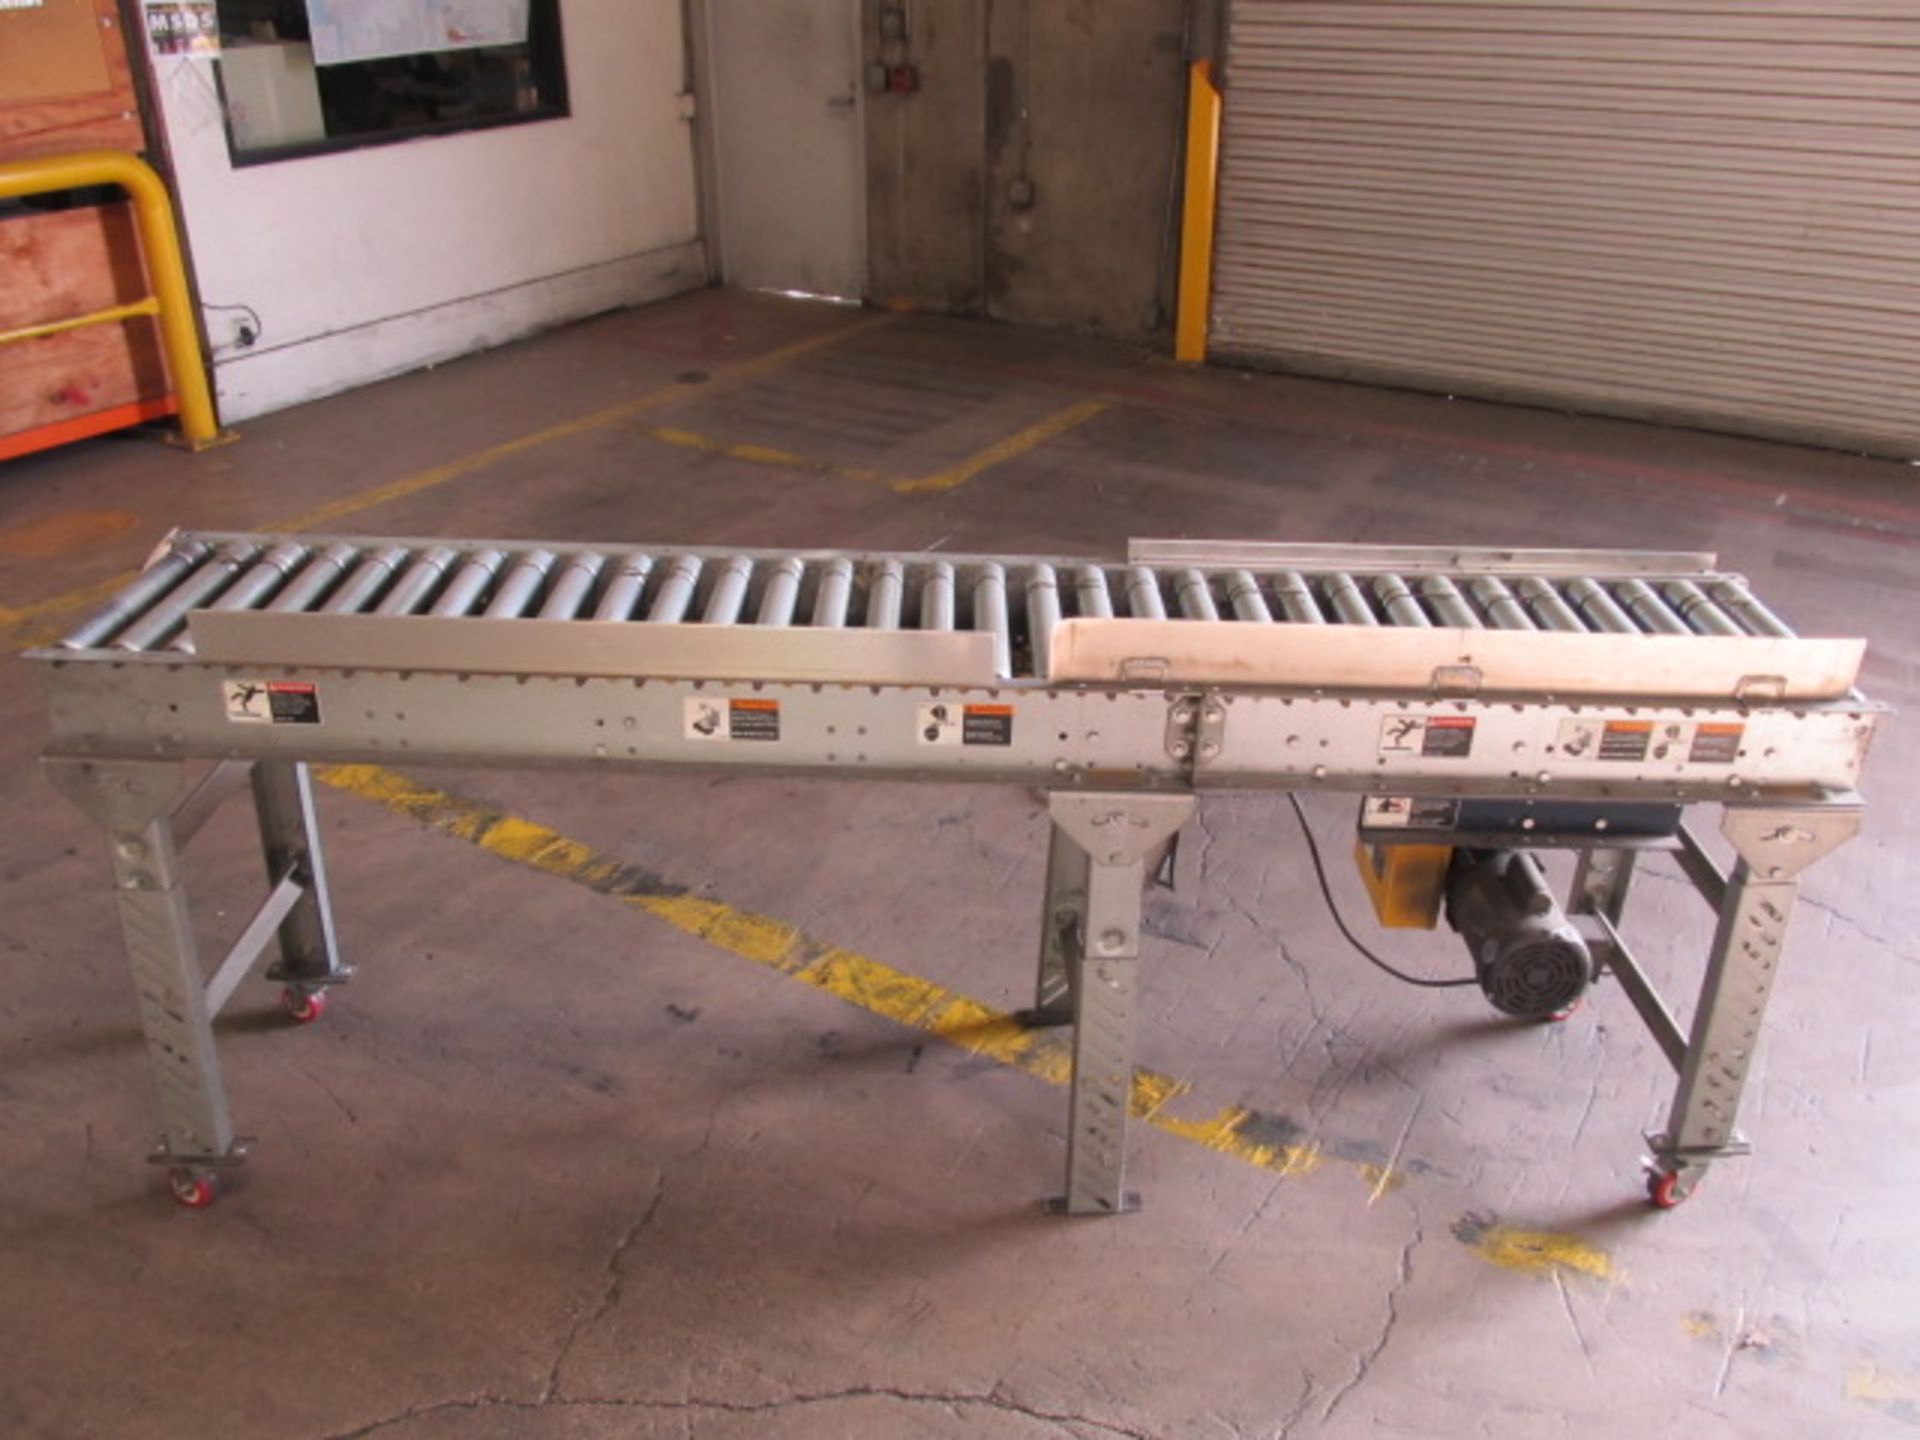 Electric Motorized Conveyor On Casters, Measures Approx. 7Ft.L x 18in.W. Asset Location: West